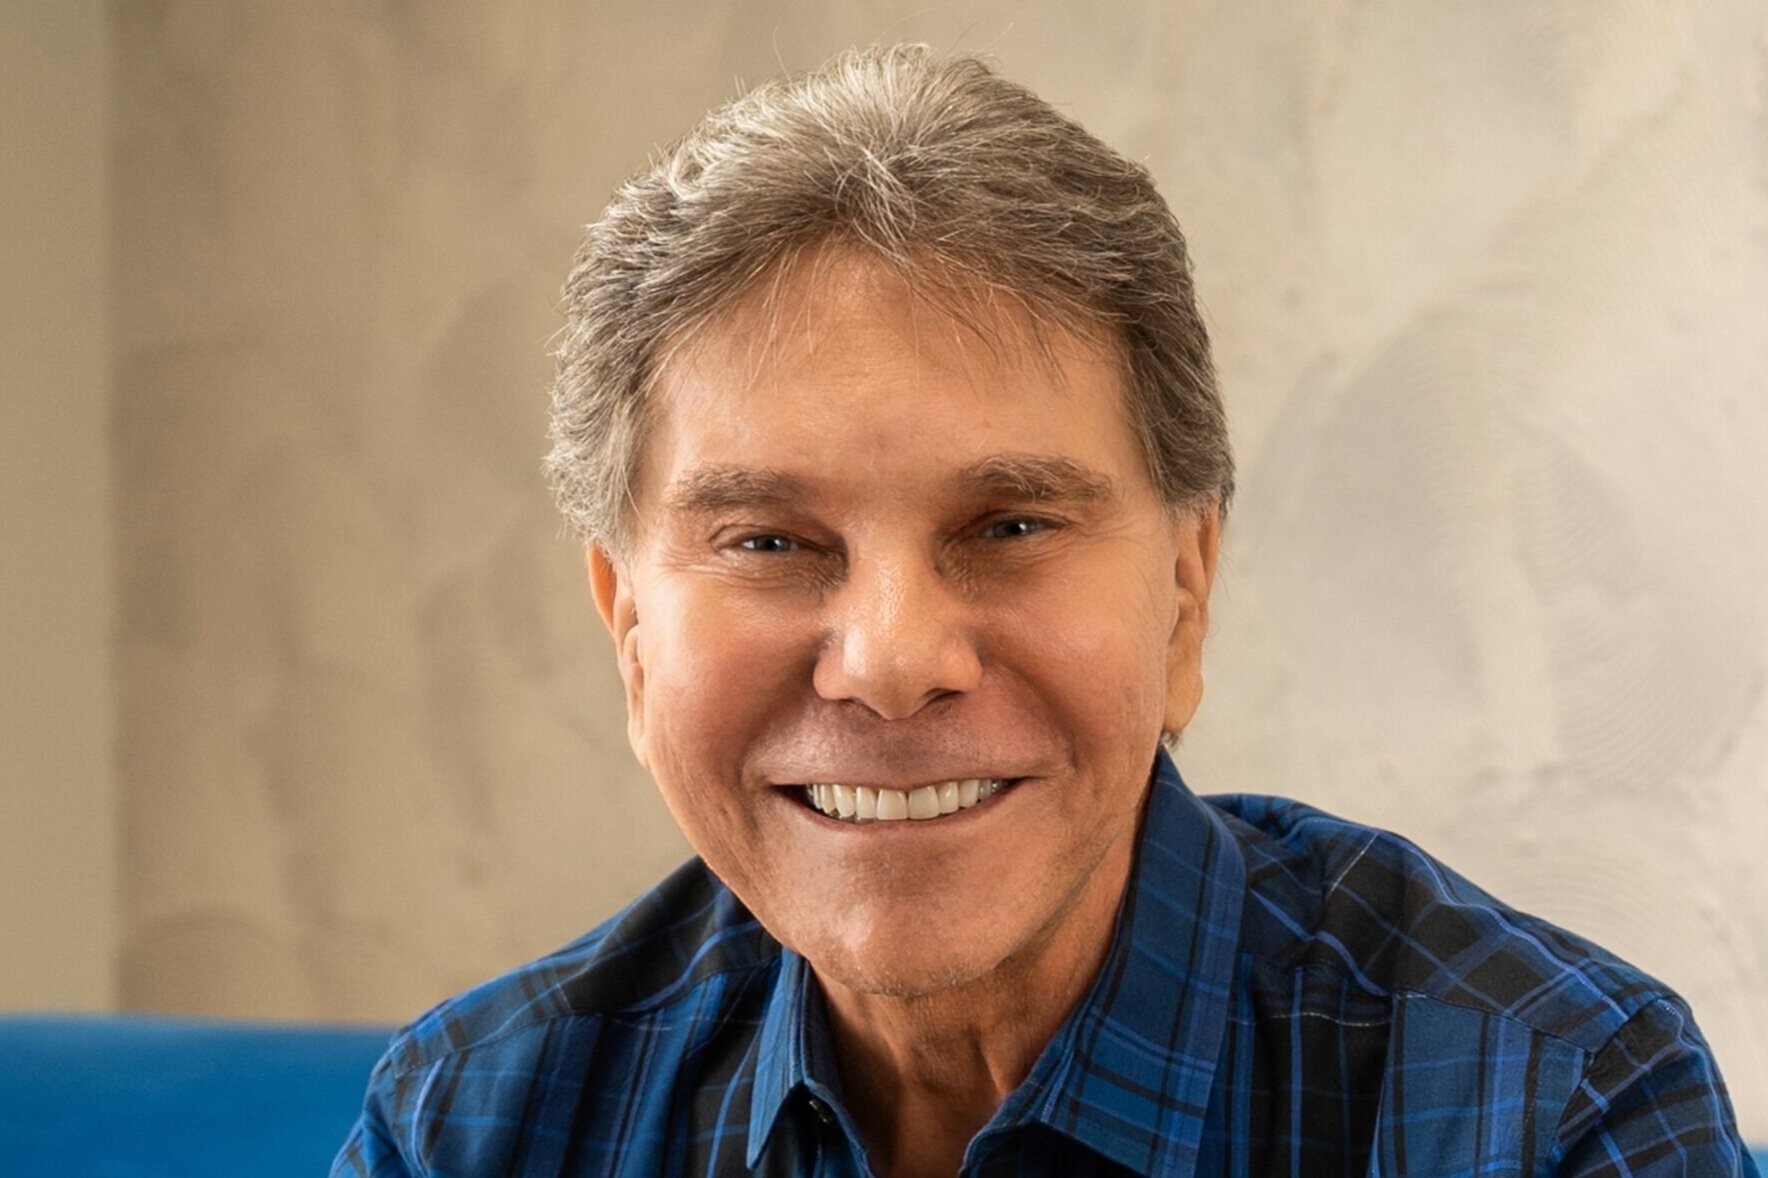 INFLUENCE AT WORK  Dr. Robert Cialdini Influence Training & Keynotes